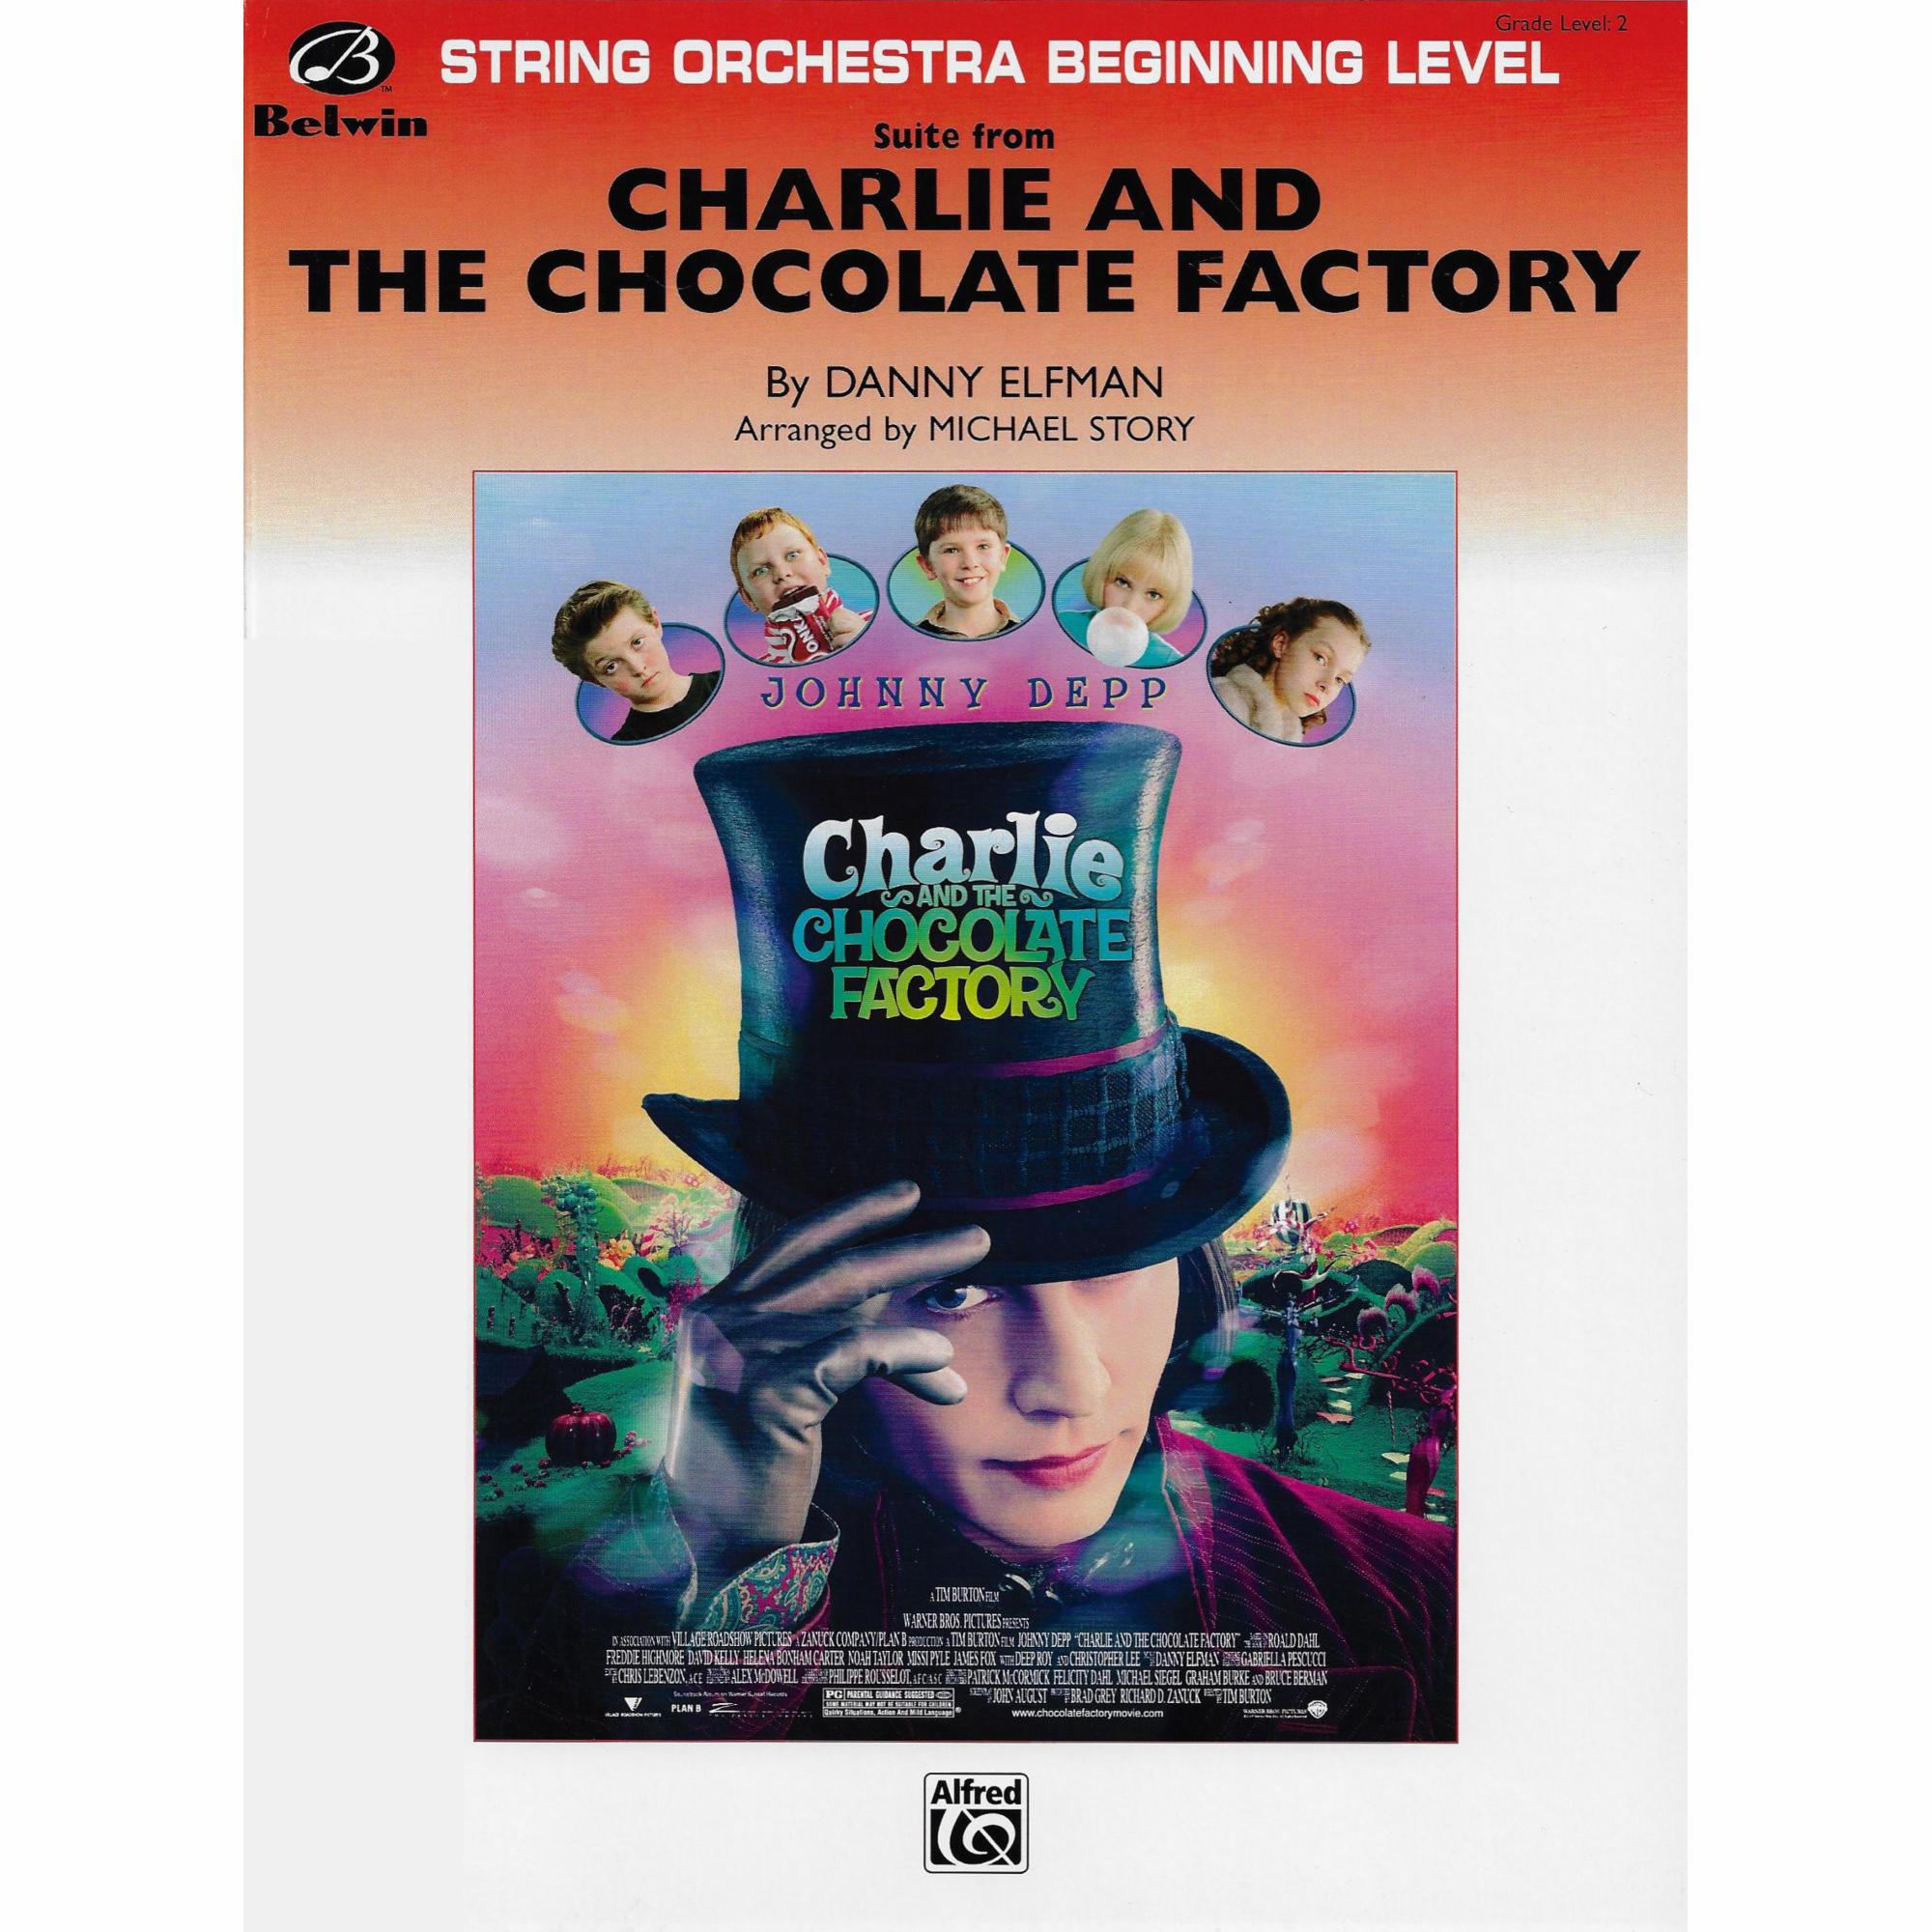 Suite from Charlie and the Chocolate Factory for String Orchestra